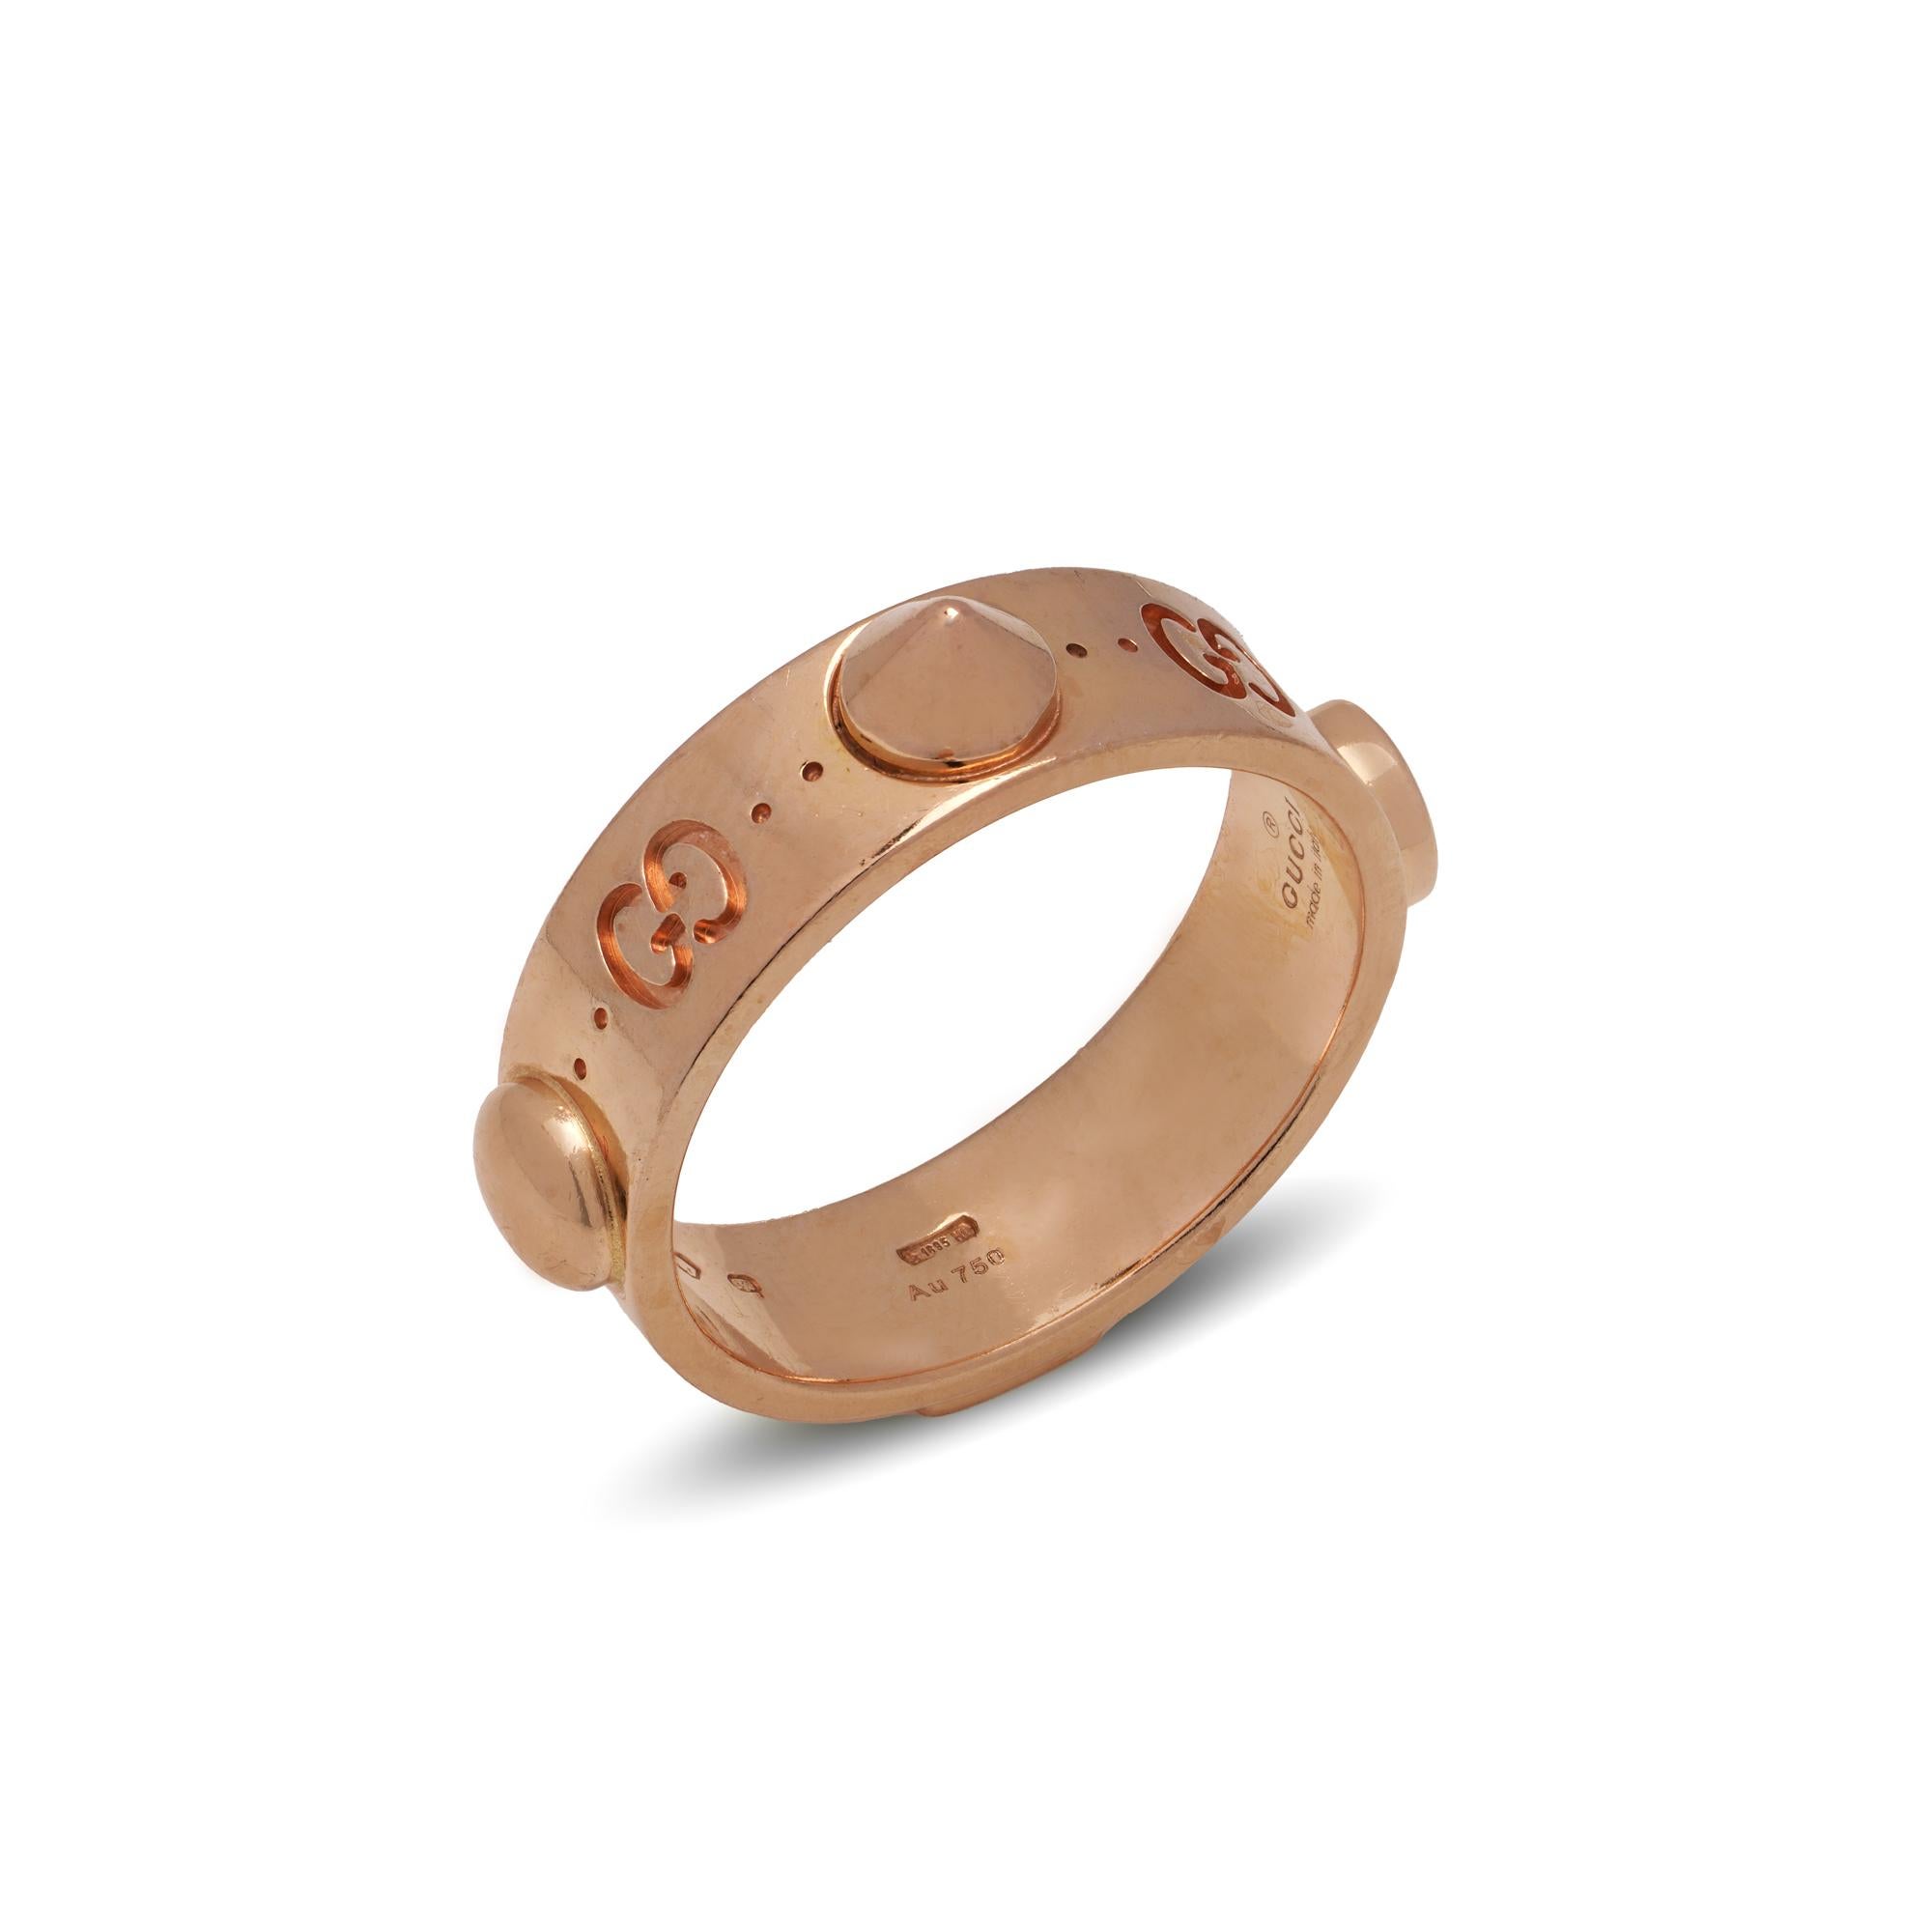 Gucci 18kt rose gold Iconic band ring with studs In Good Condition For Sale In Braintree, GB